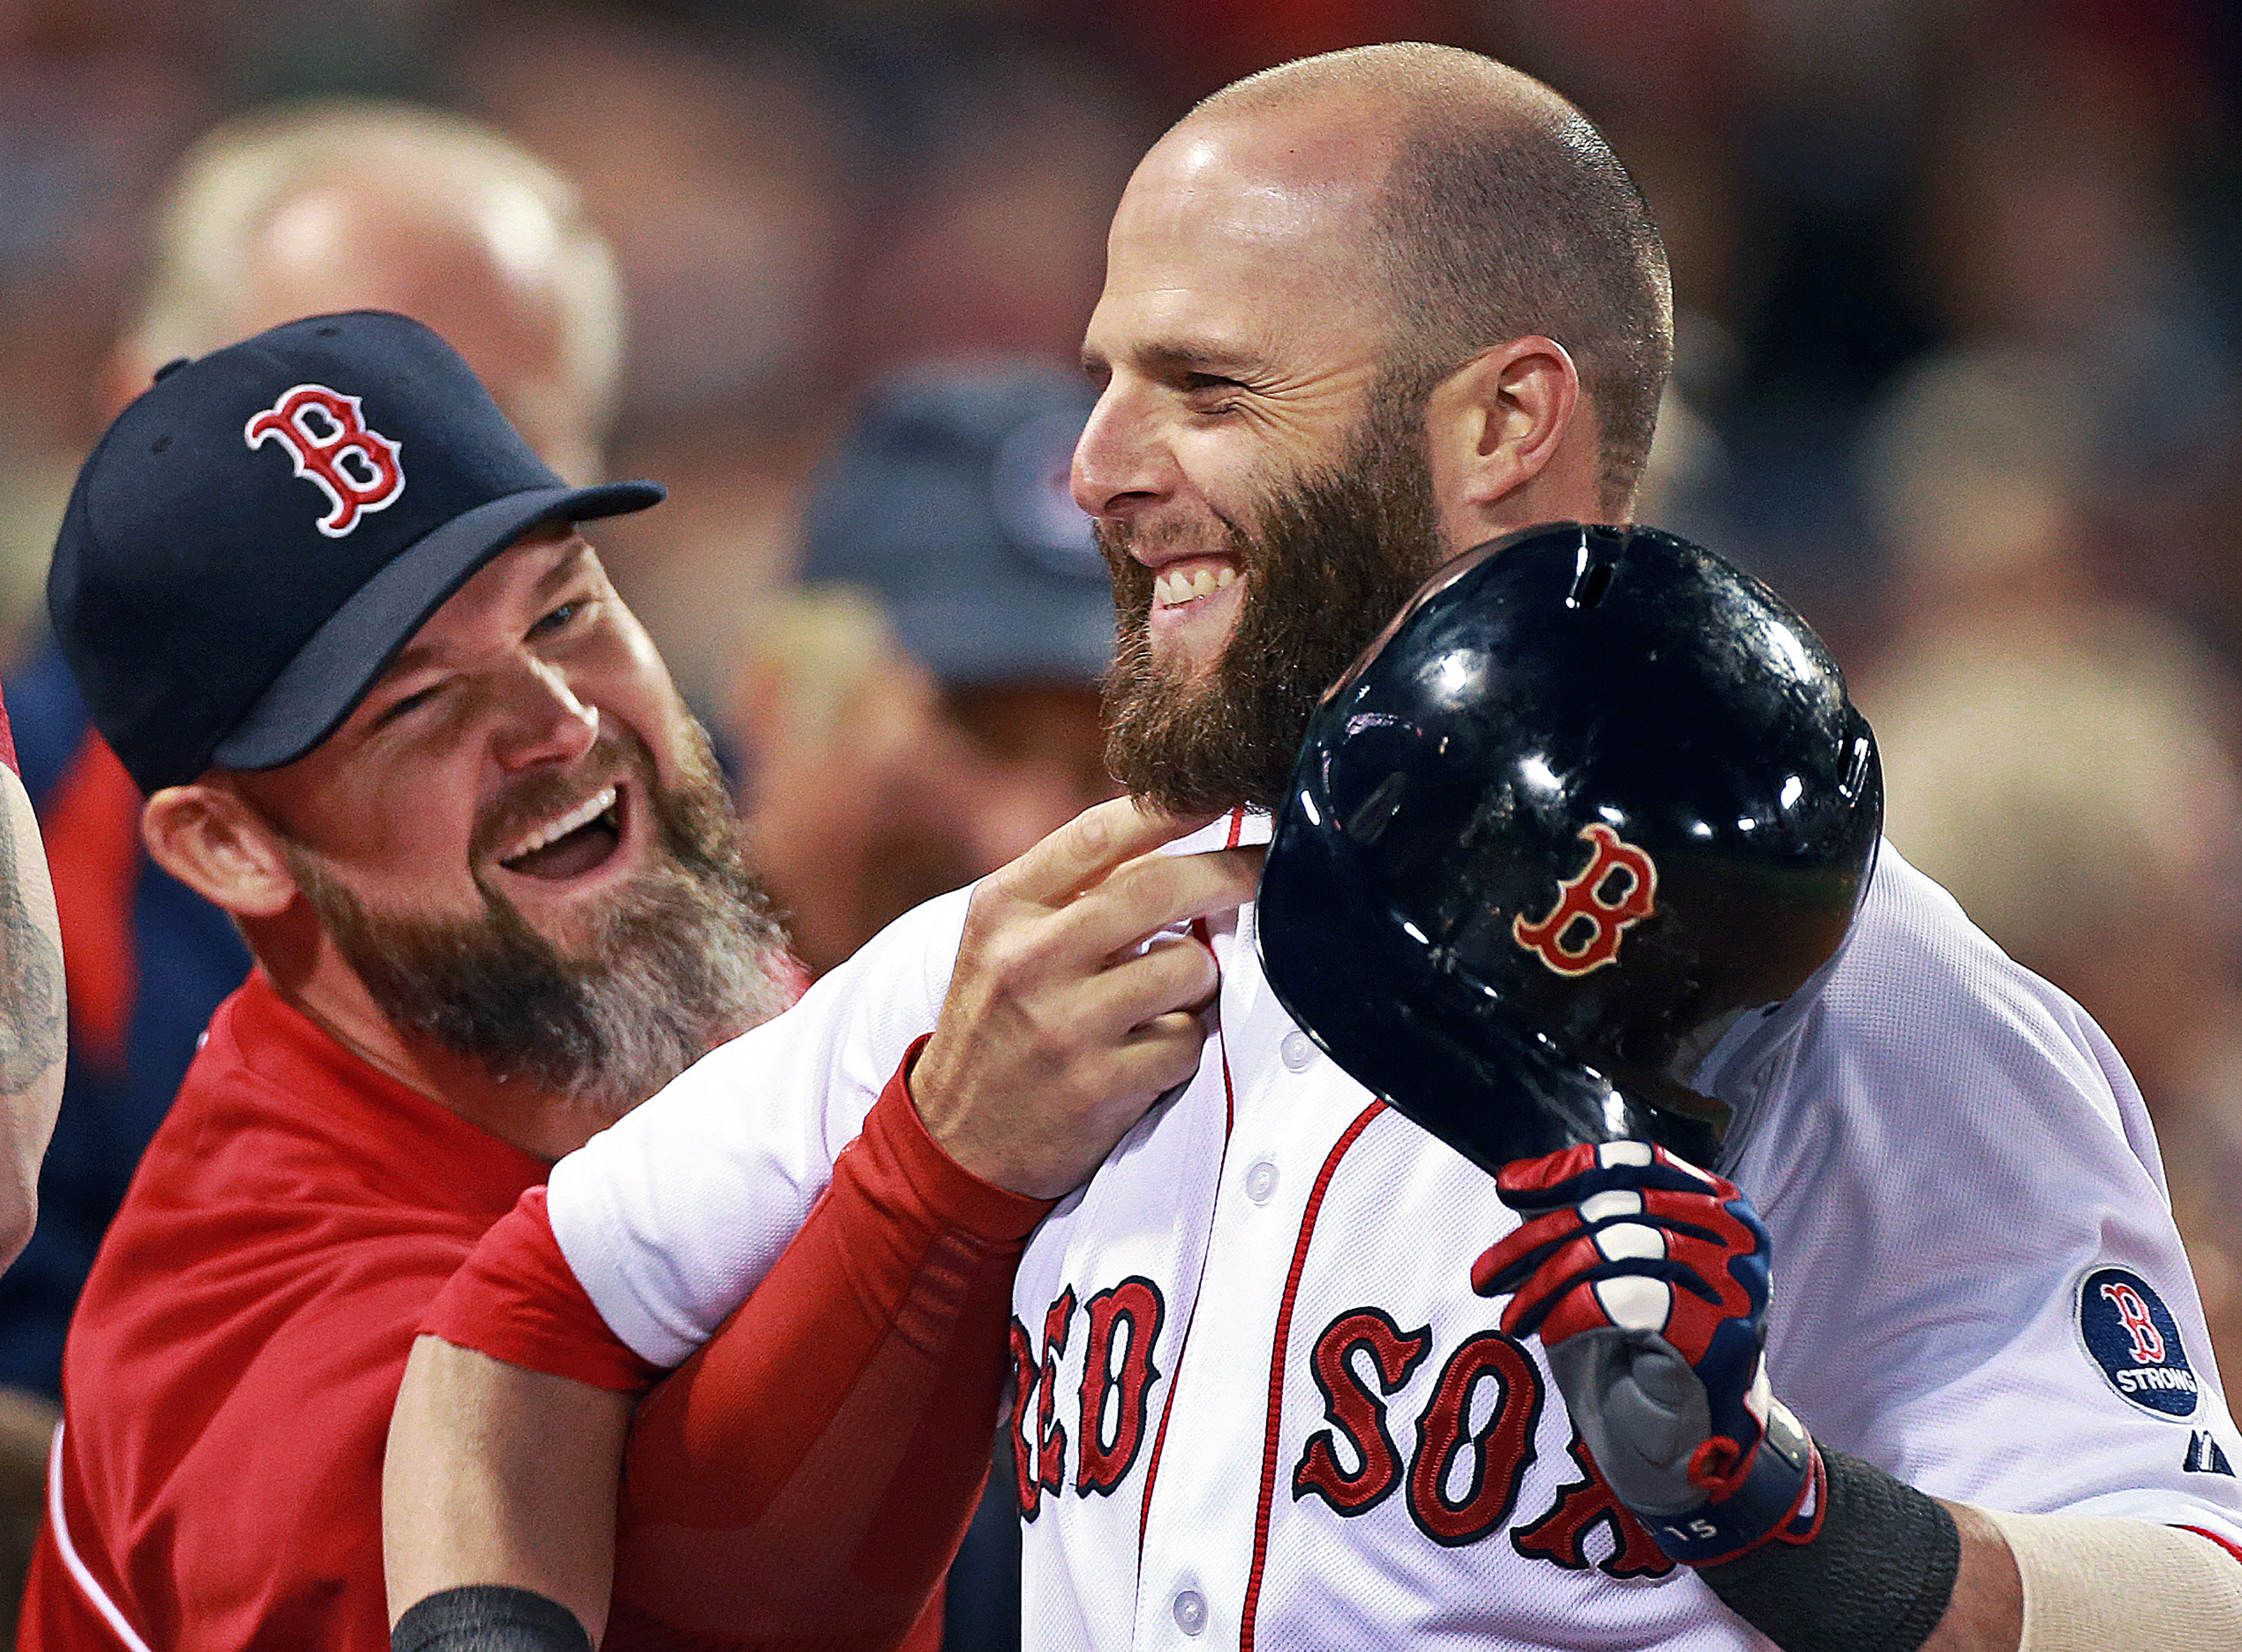 Dustin Pedroia's time on Red Sox roster may soon have to end - The